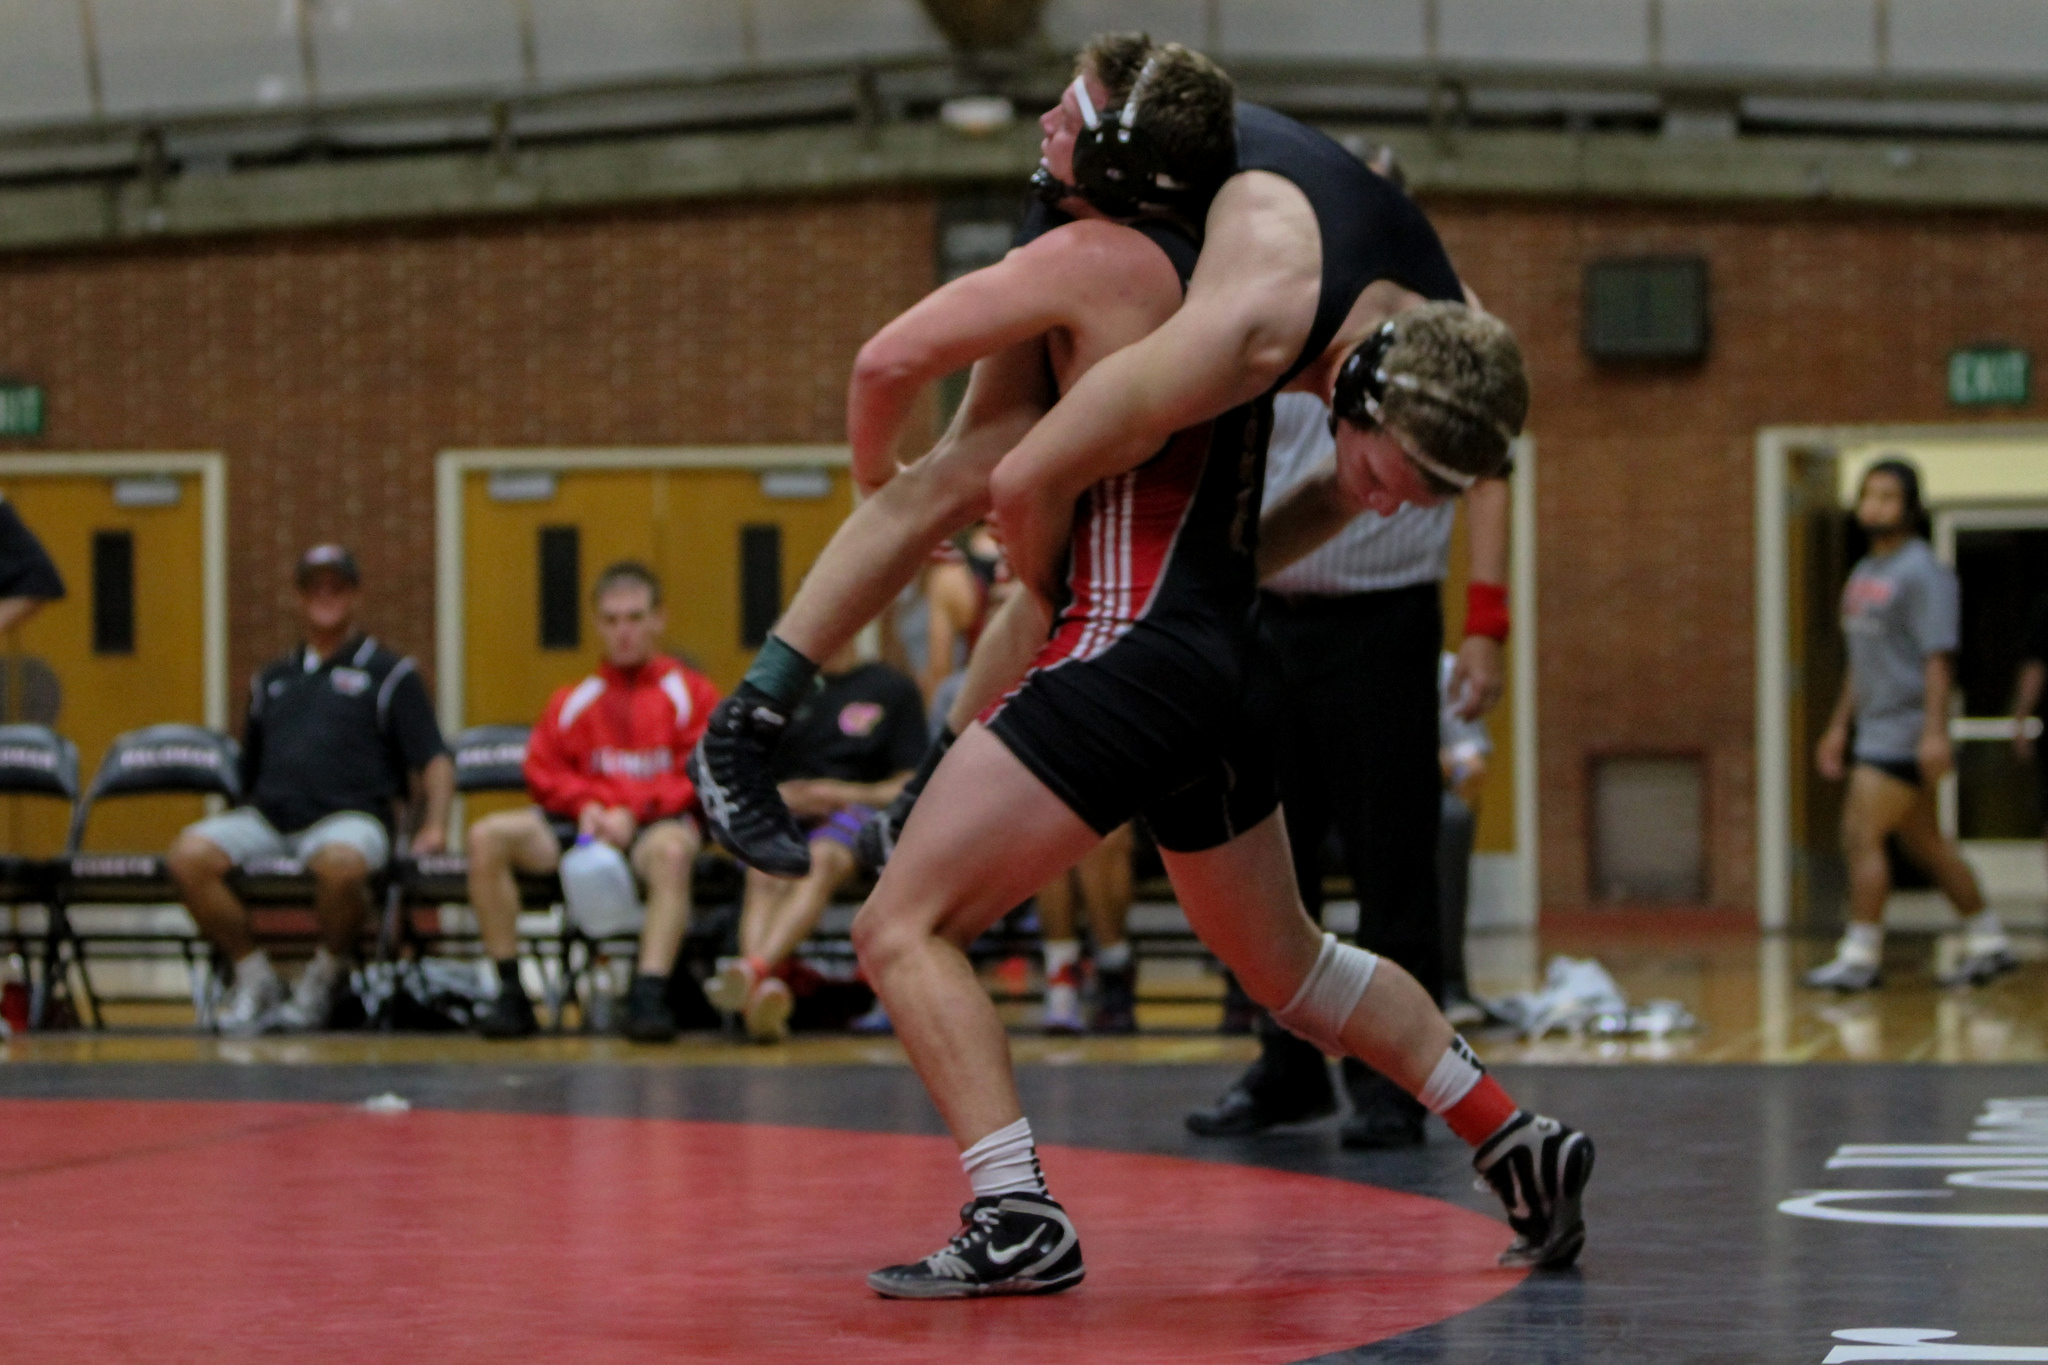 Alex Graves again went undefeated and remains No. 1 in state rankings with a 16-0 record. (Philip Farry/The Telescope)